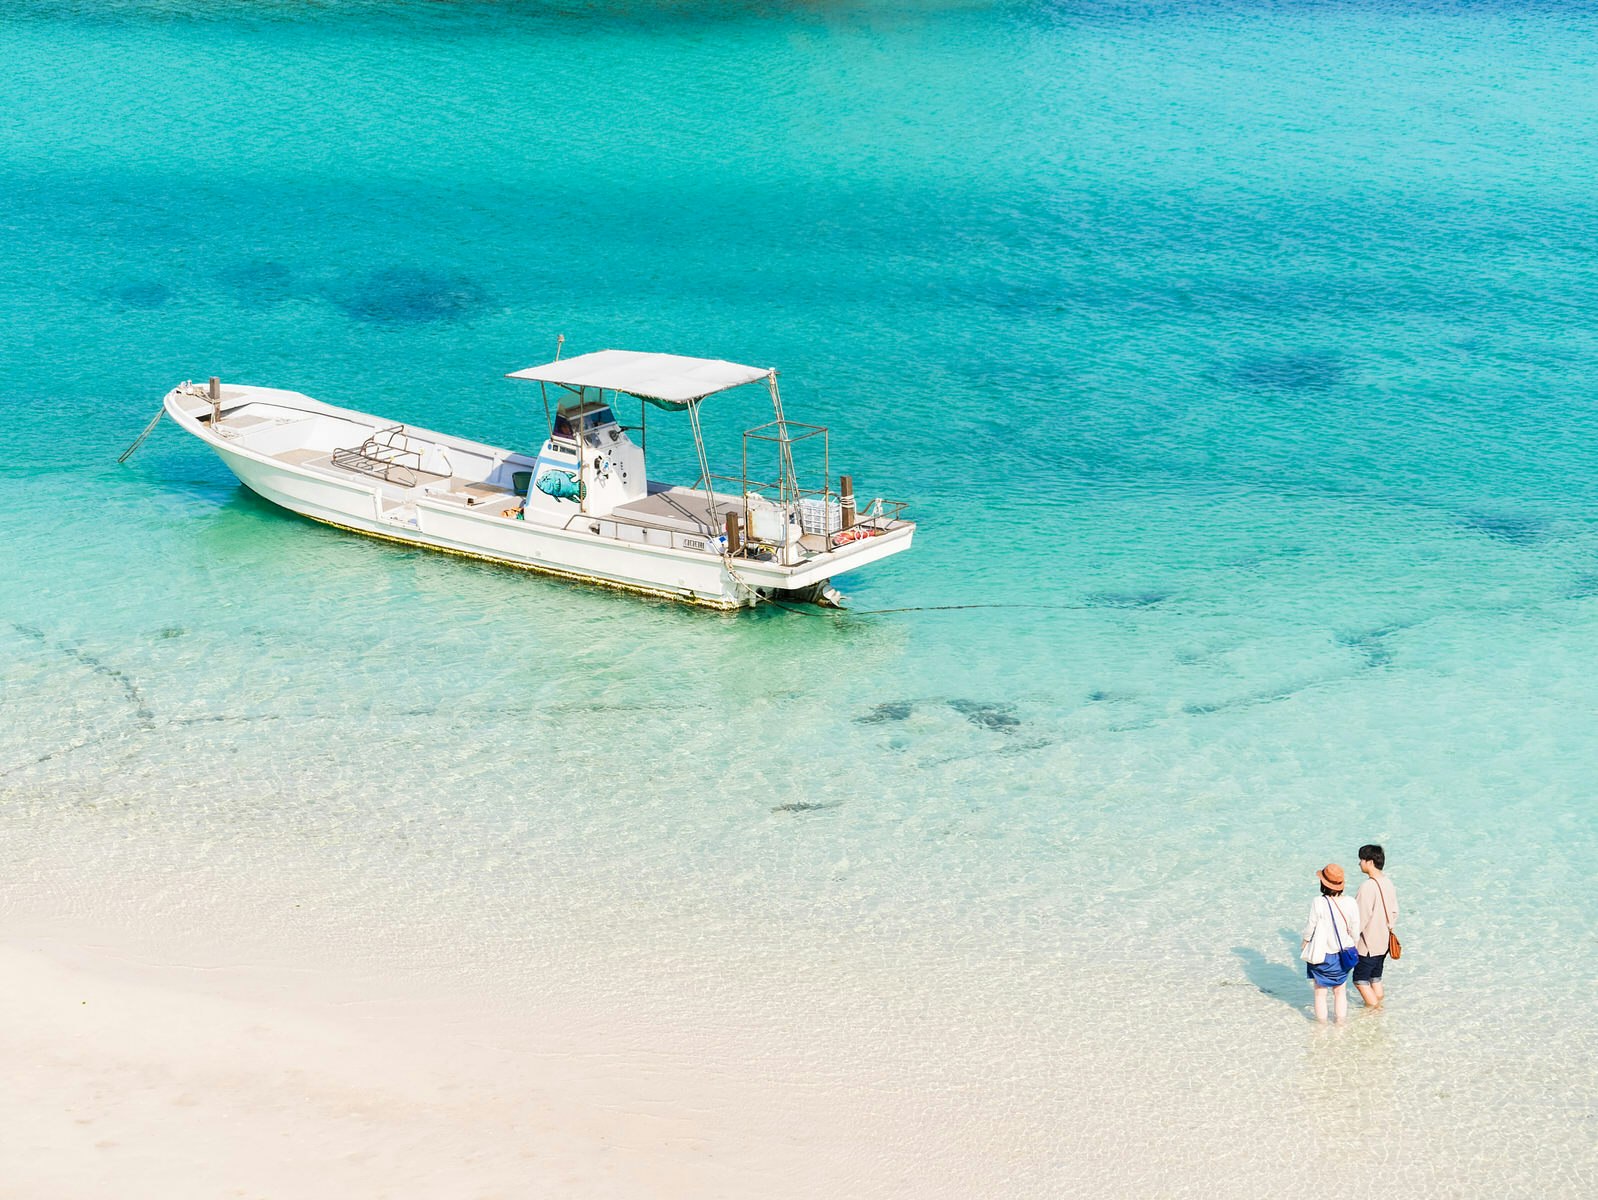 A couple waits for their boat to come in on Ishigaki-jima